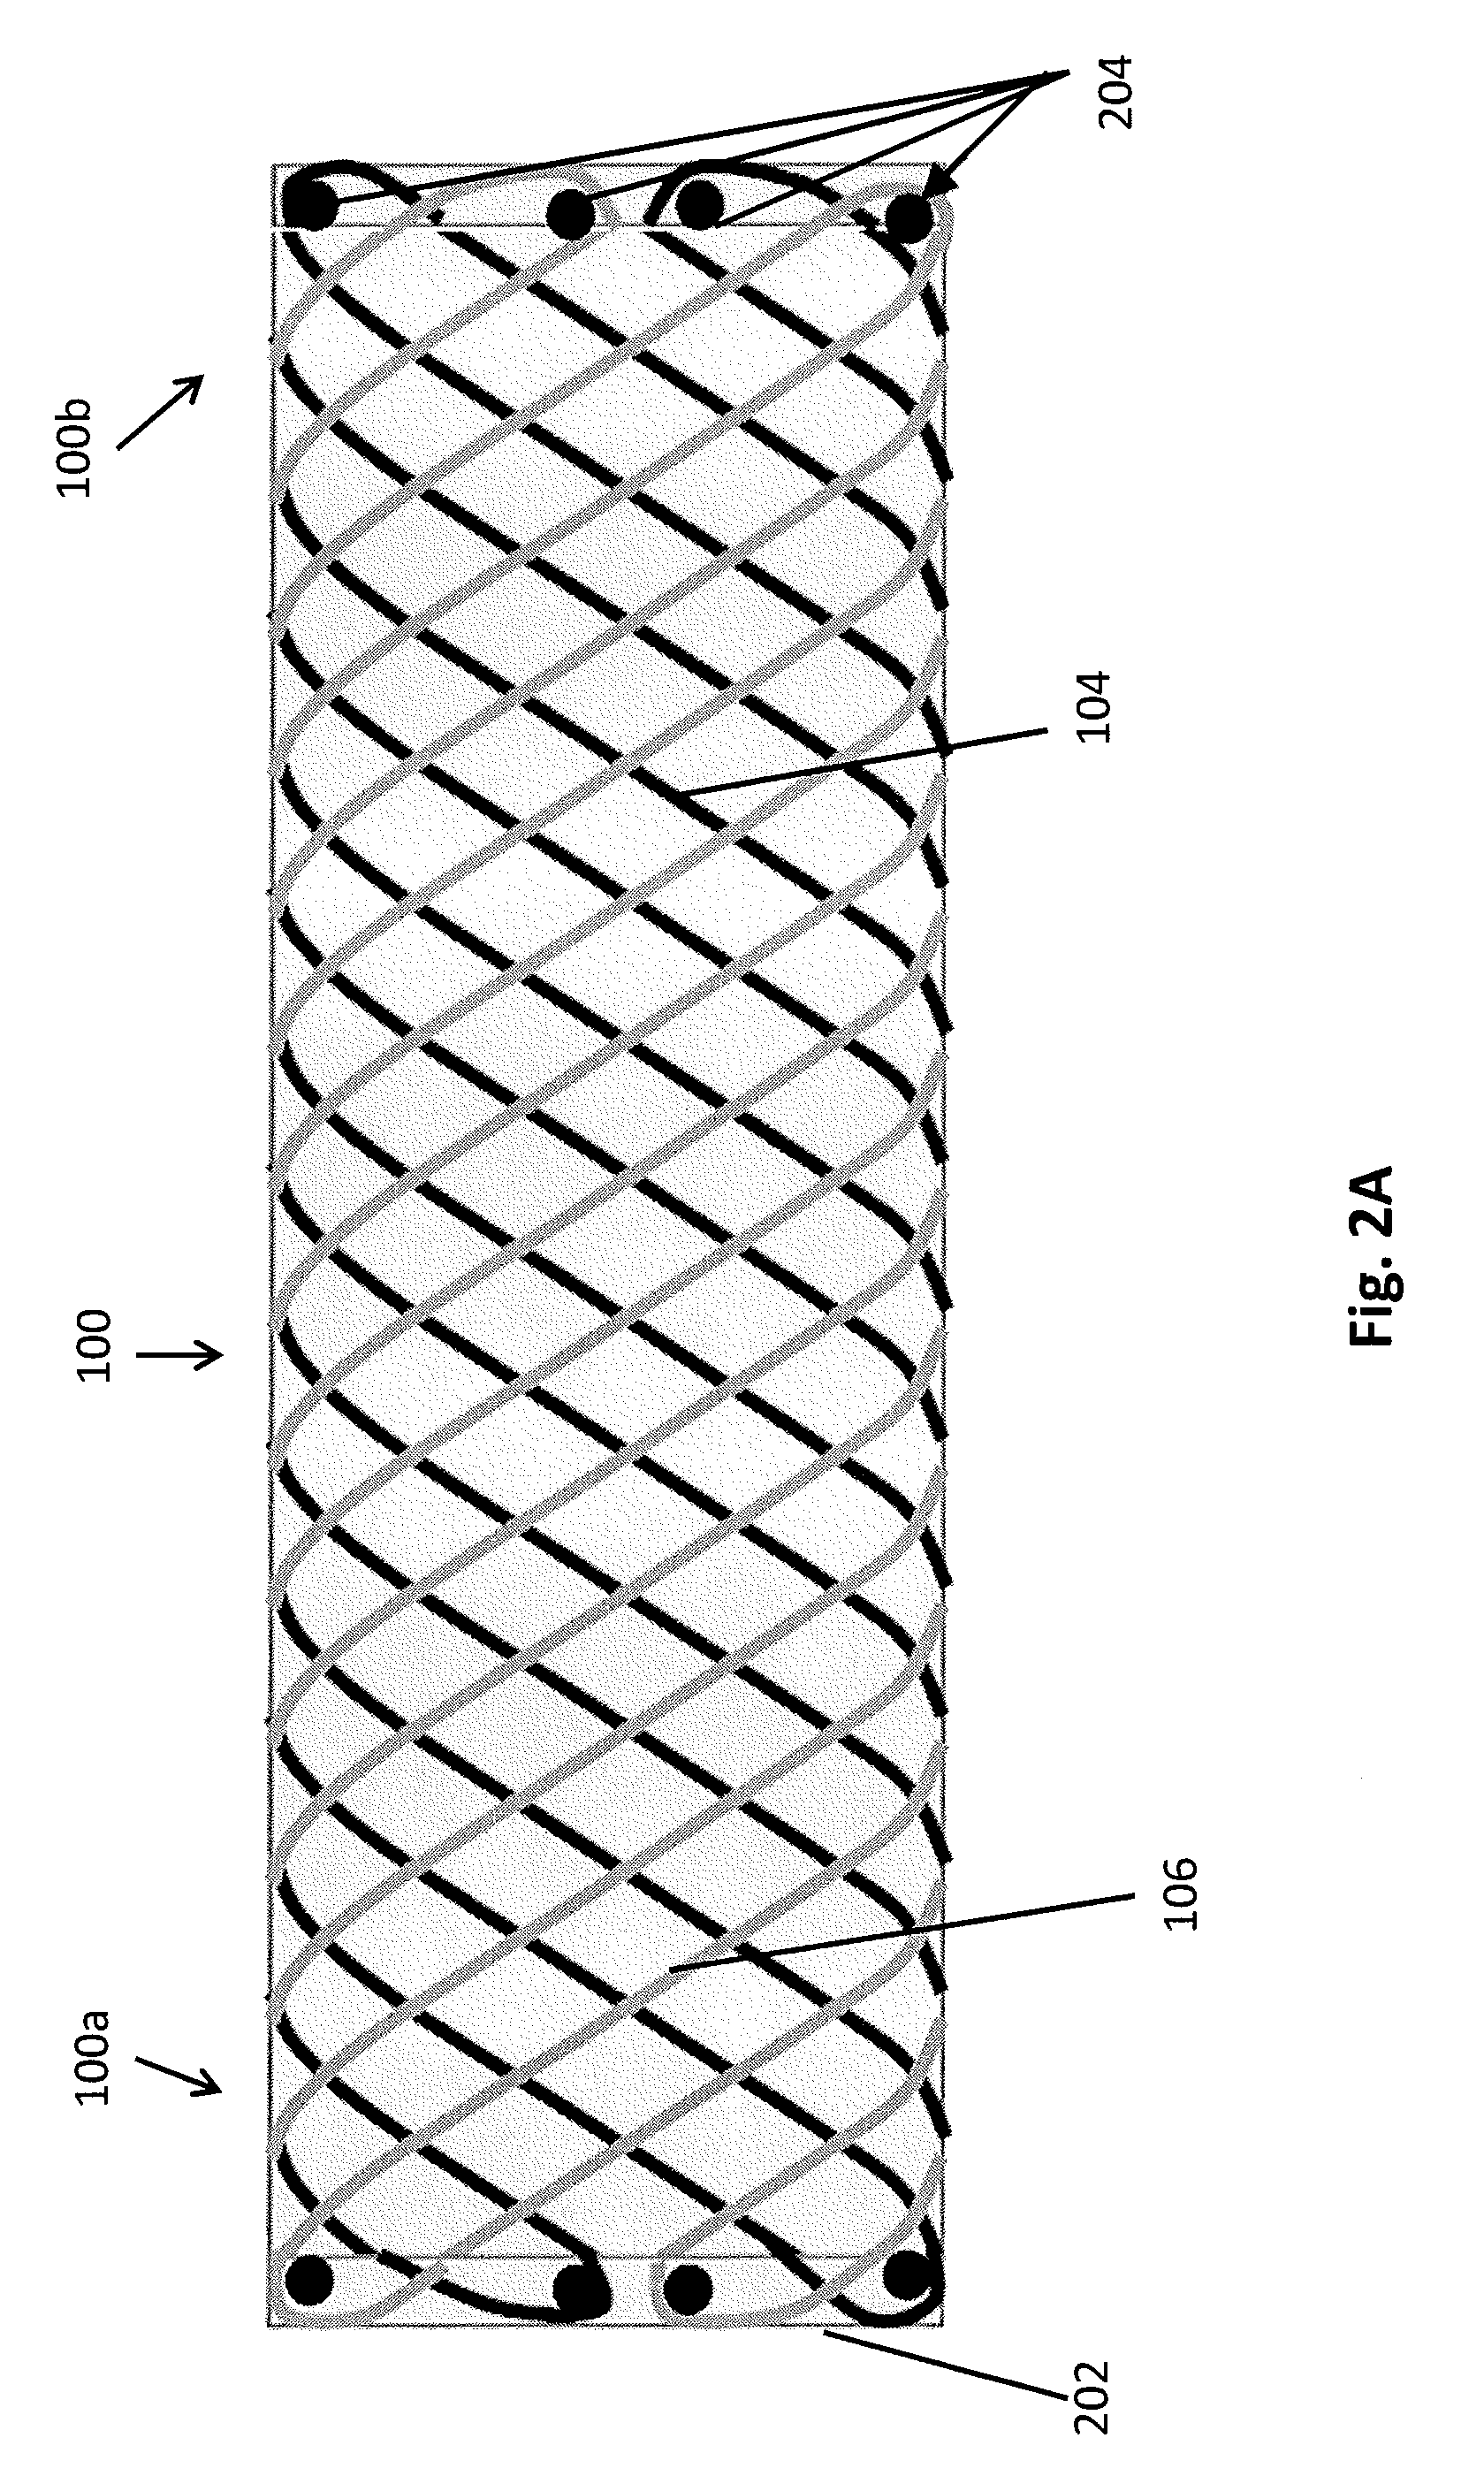 Braided helical wire stent